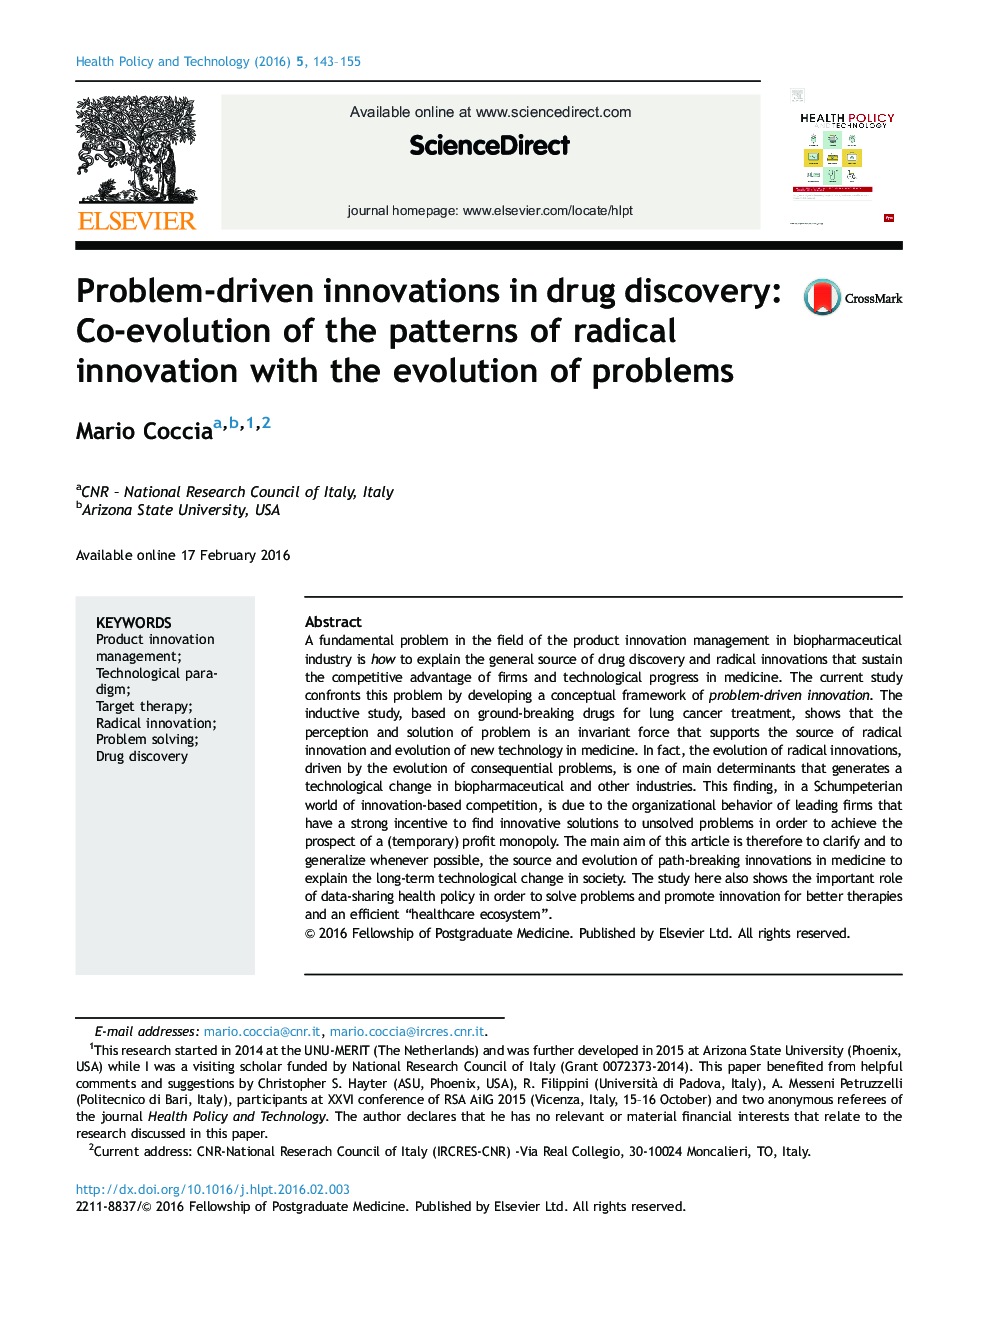 Problem-driven innovations in drug discovery: Co-evolution of the patterns of radical innovation with the evolution of problems